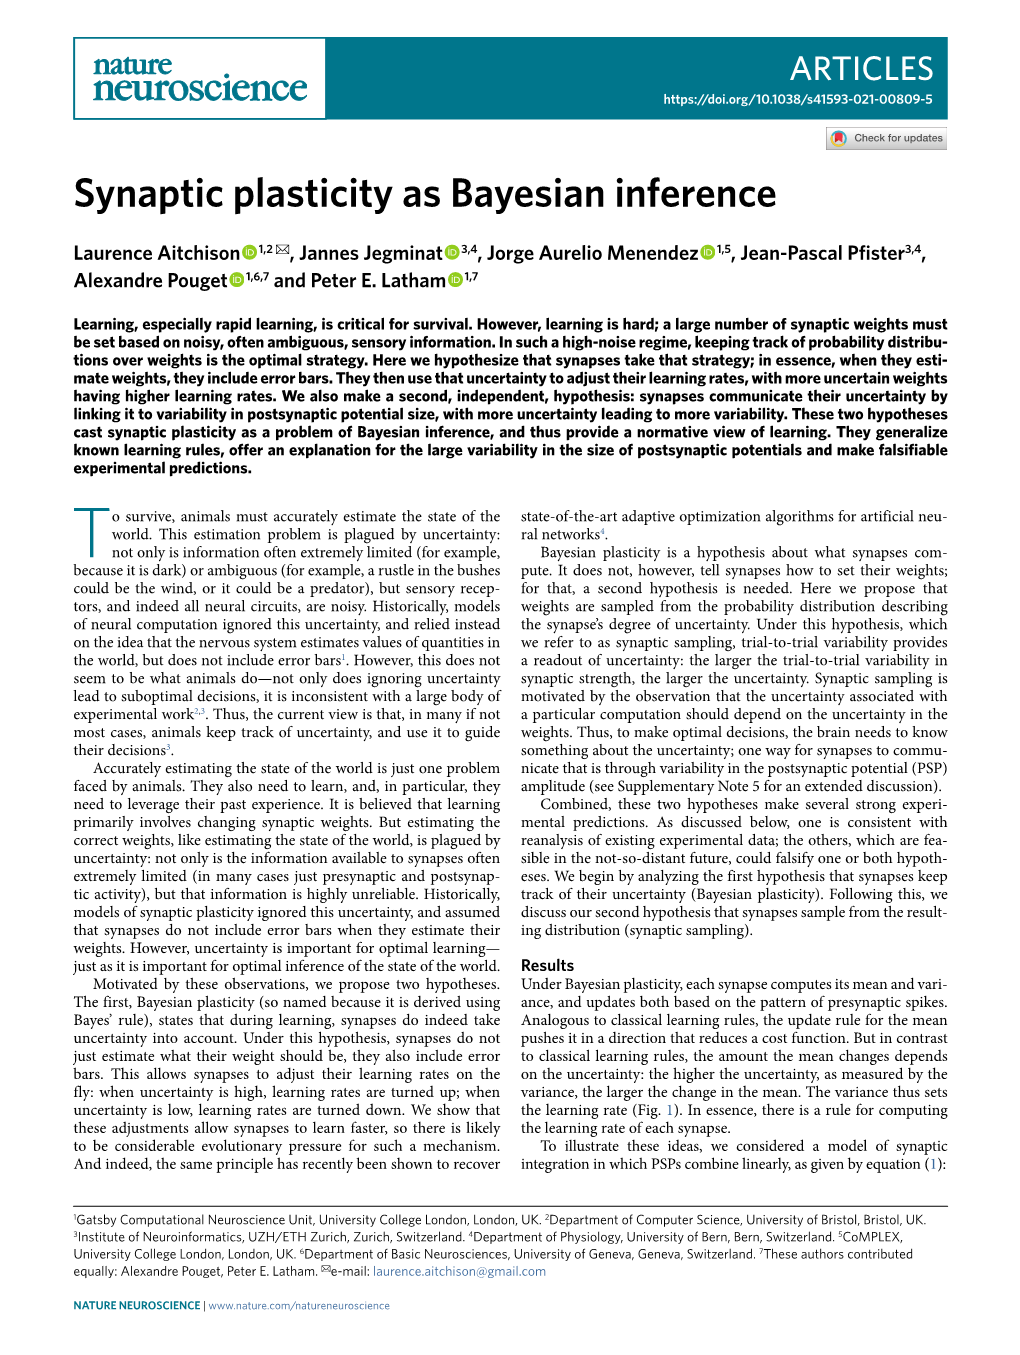 Synaptic Plasticity As Bayesian Inference